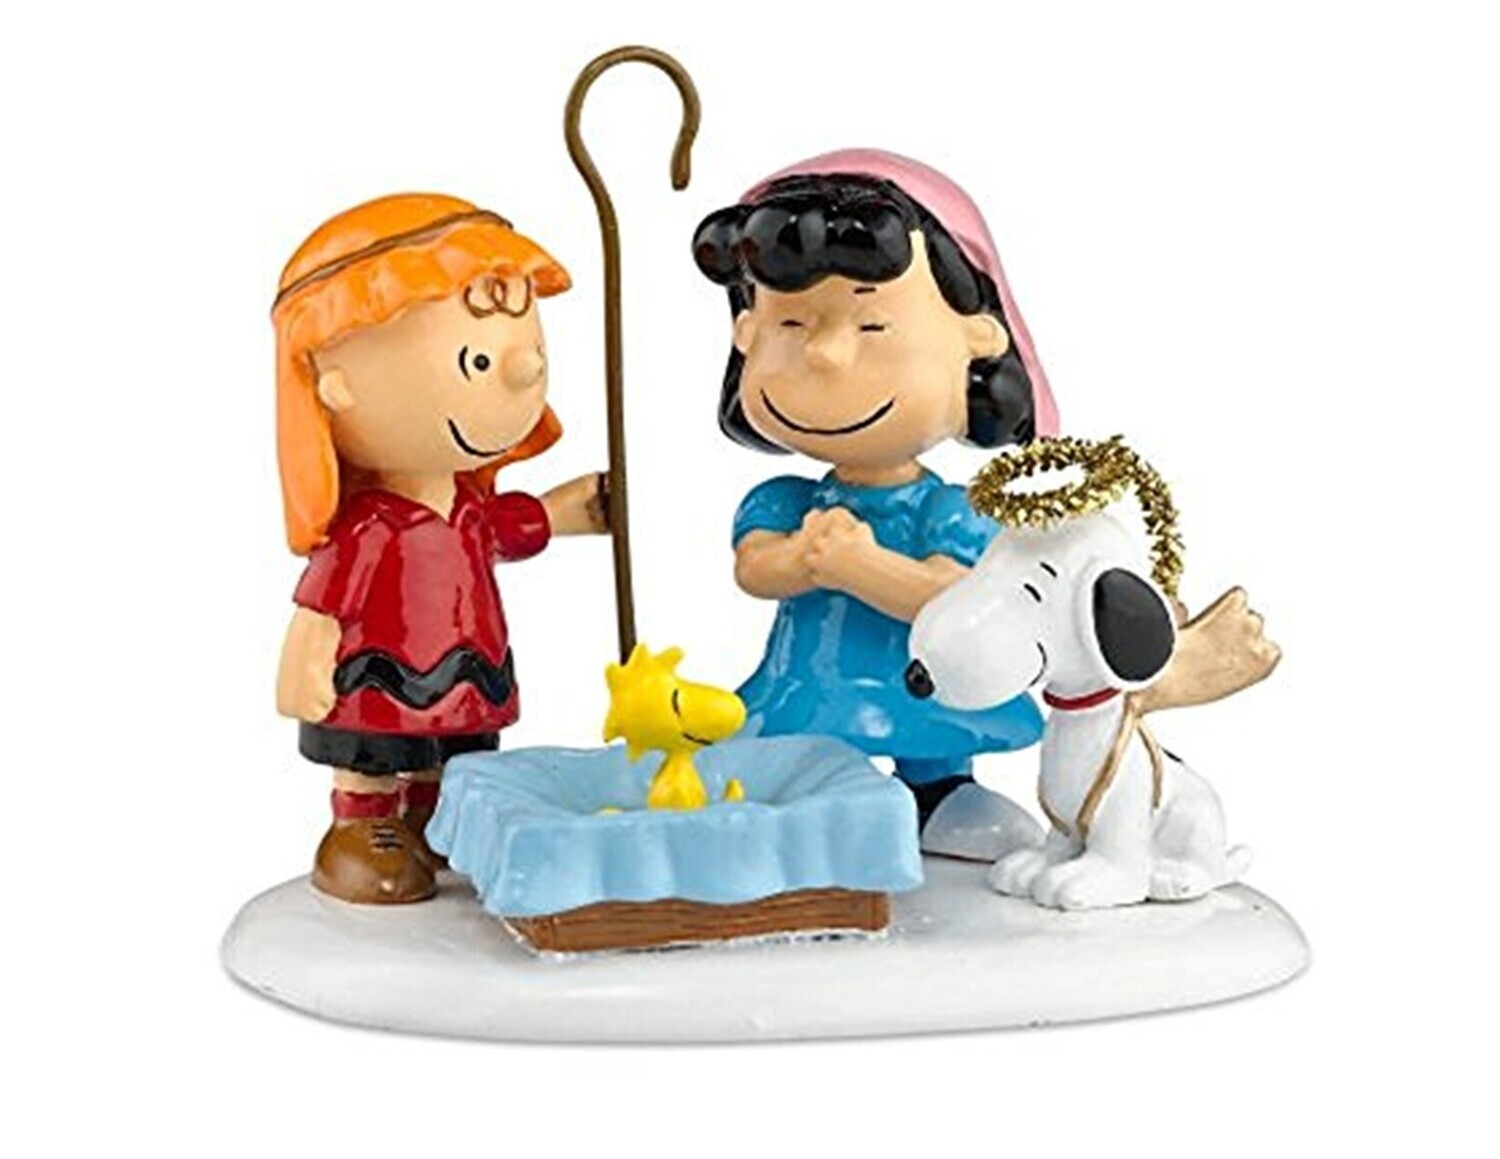 Department 56 Peanuts Village "Peanuts Pageant" Charlie Brown, Lucy, Snoopy & Woodstock Figurine (808964)